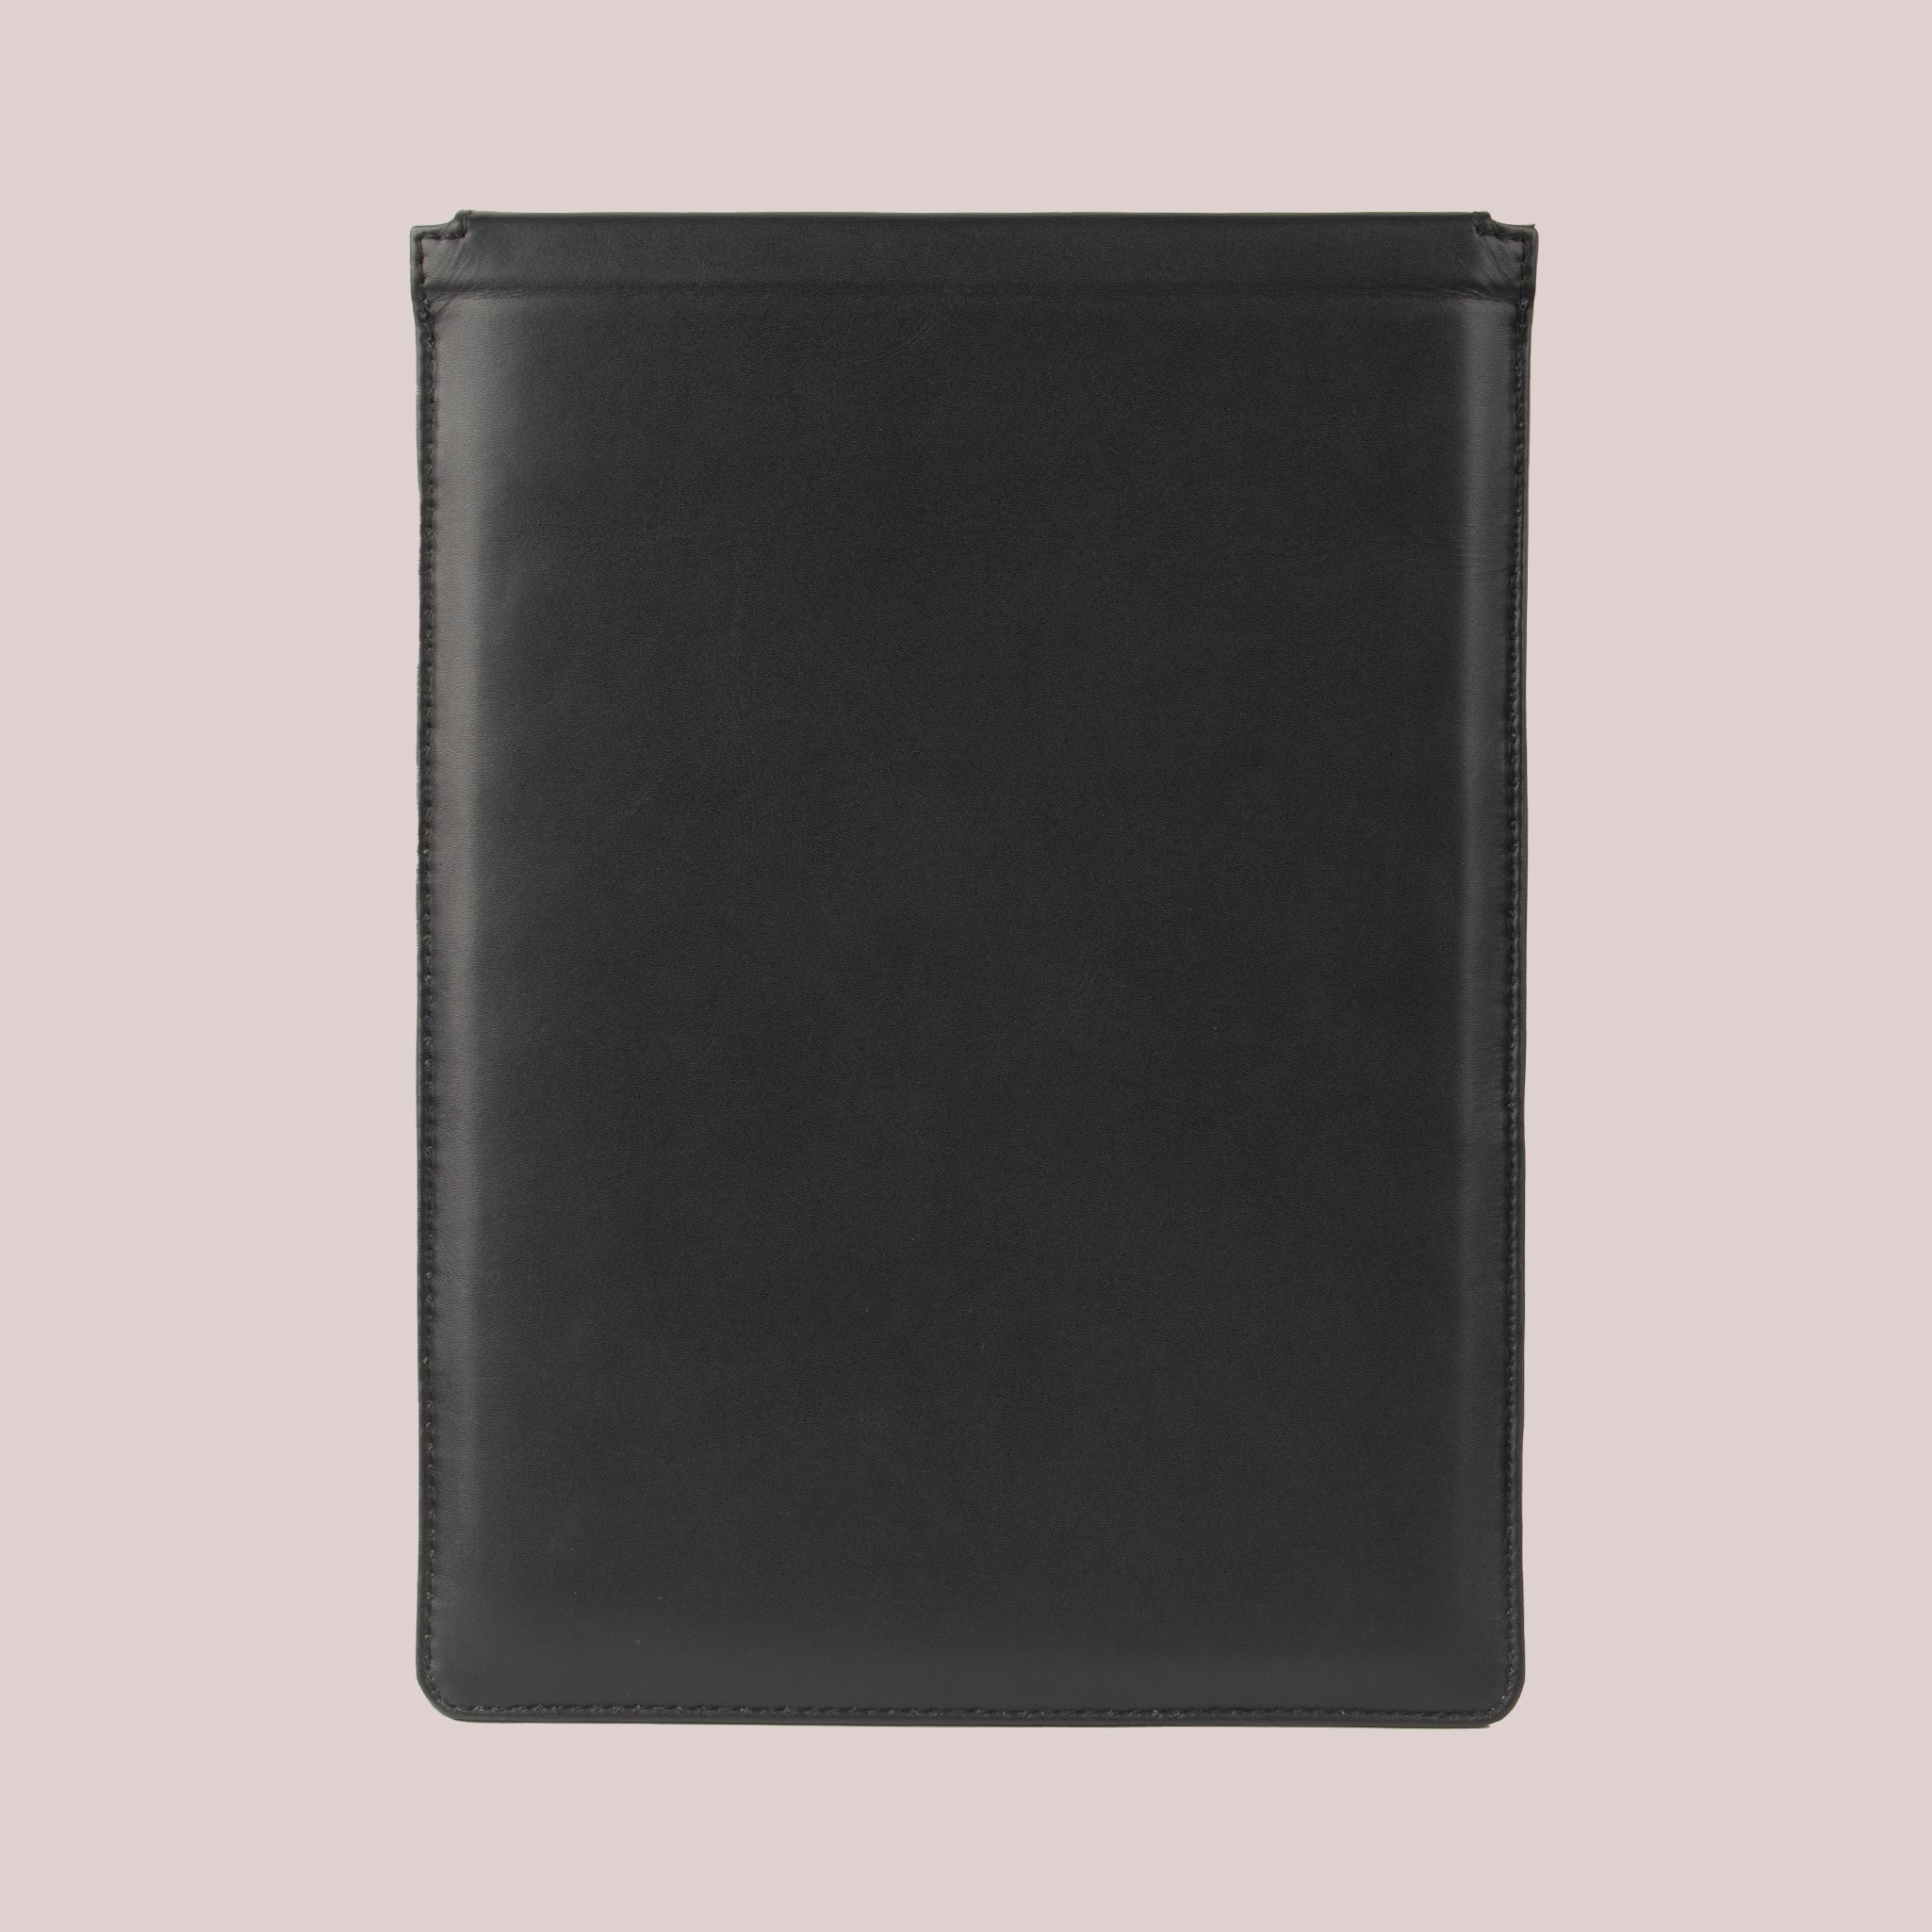 Black leather sleeve for Macbook